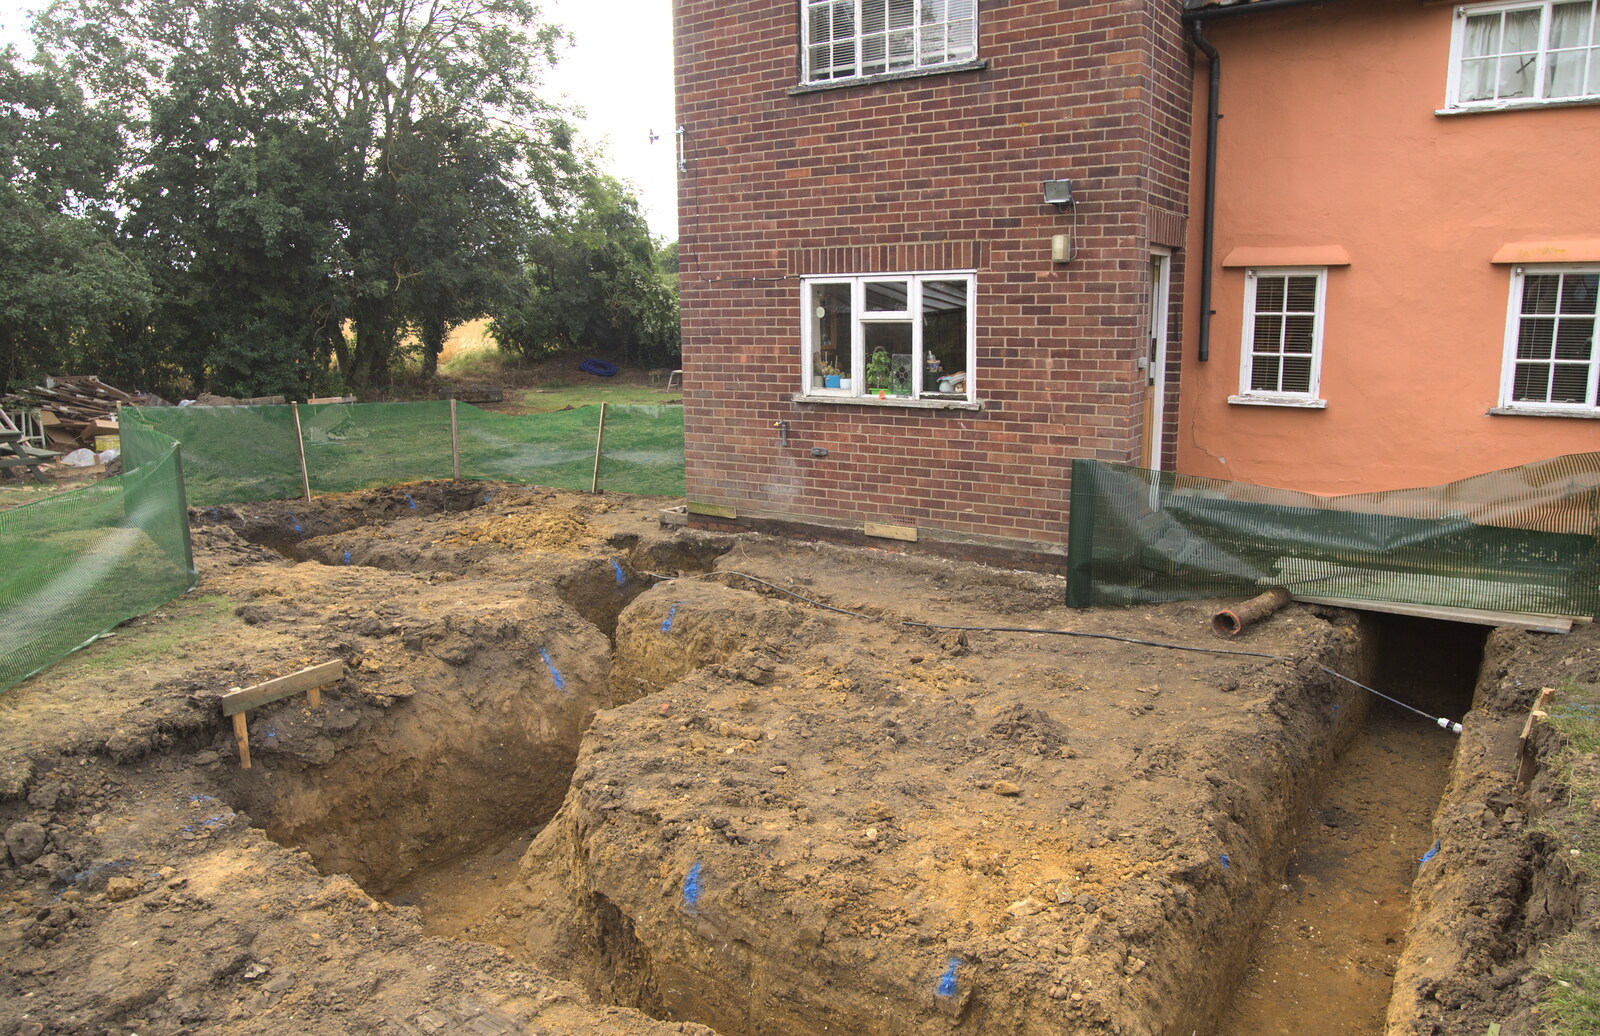 Meanwhile, footings are dug from Grand Designs: Building Commences, Brome, Suffolk - 8th August 2013